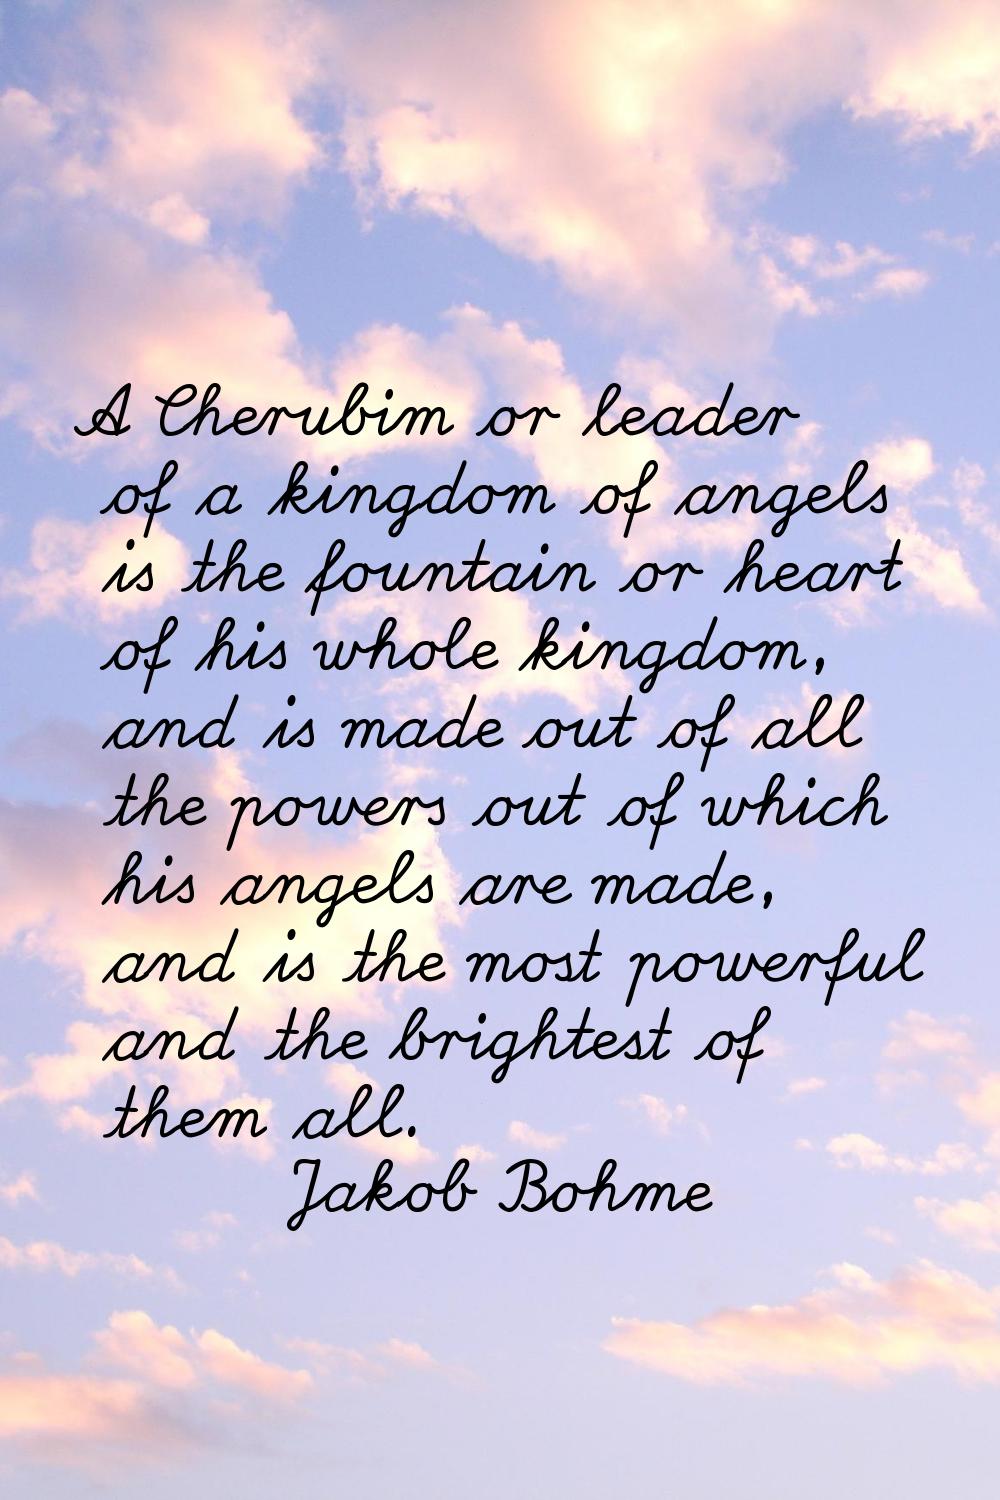 A Cherubim or leader of a kingdom of angels is the fountain or heart of his whole kingdom, and is m